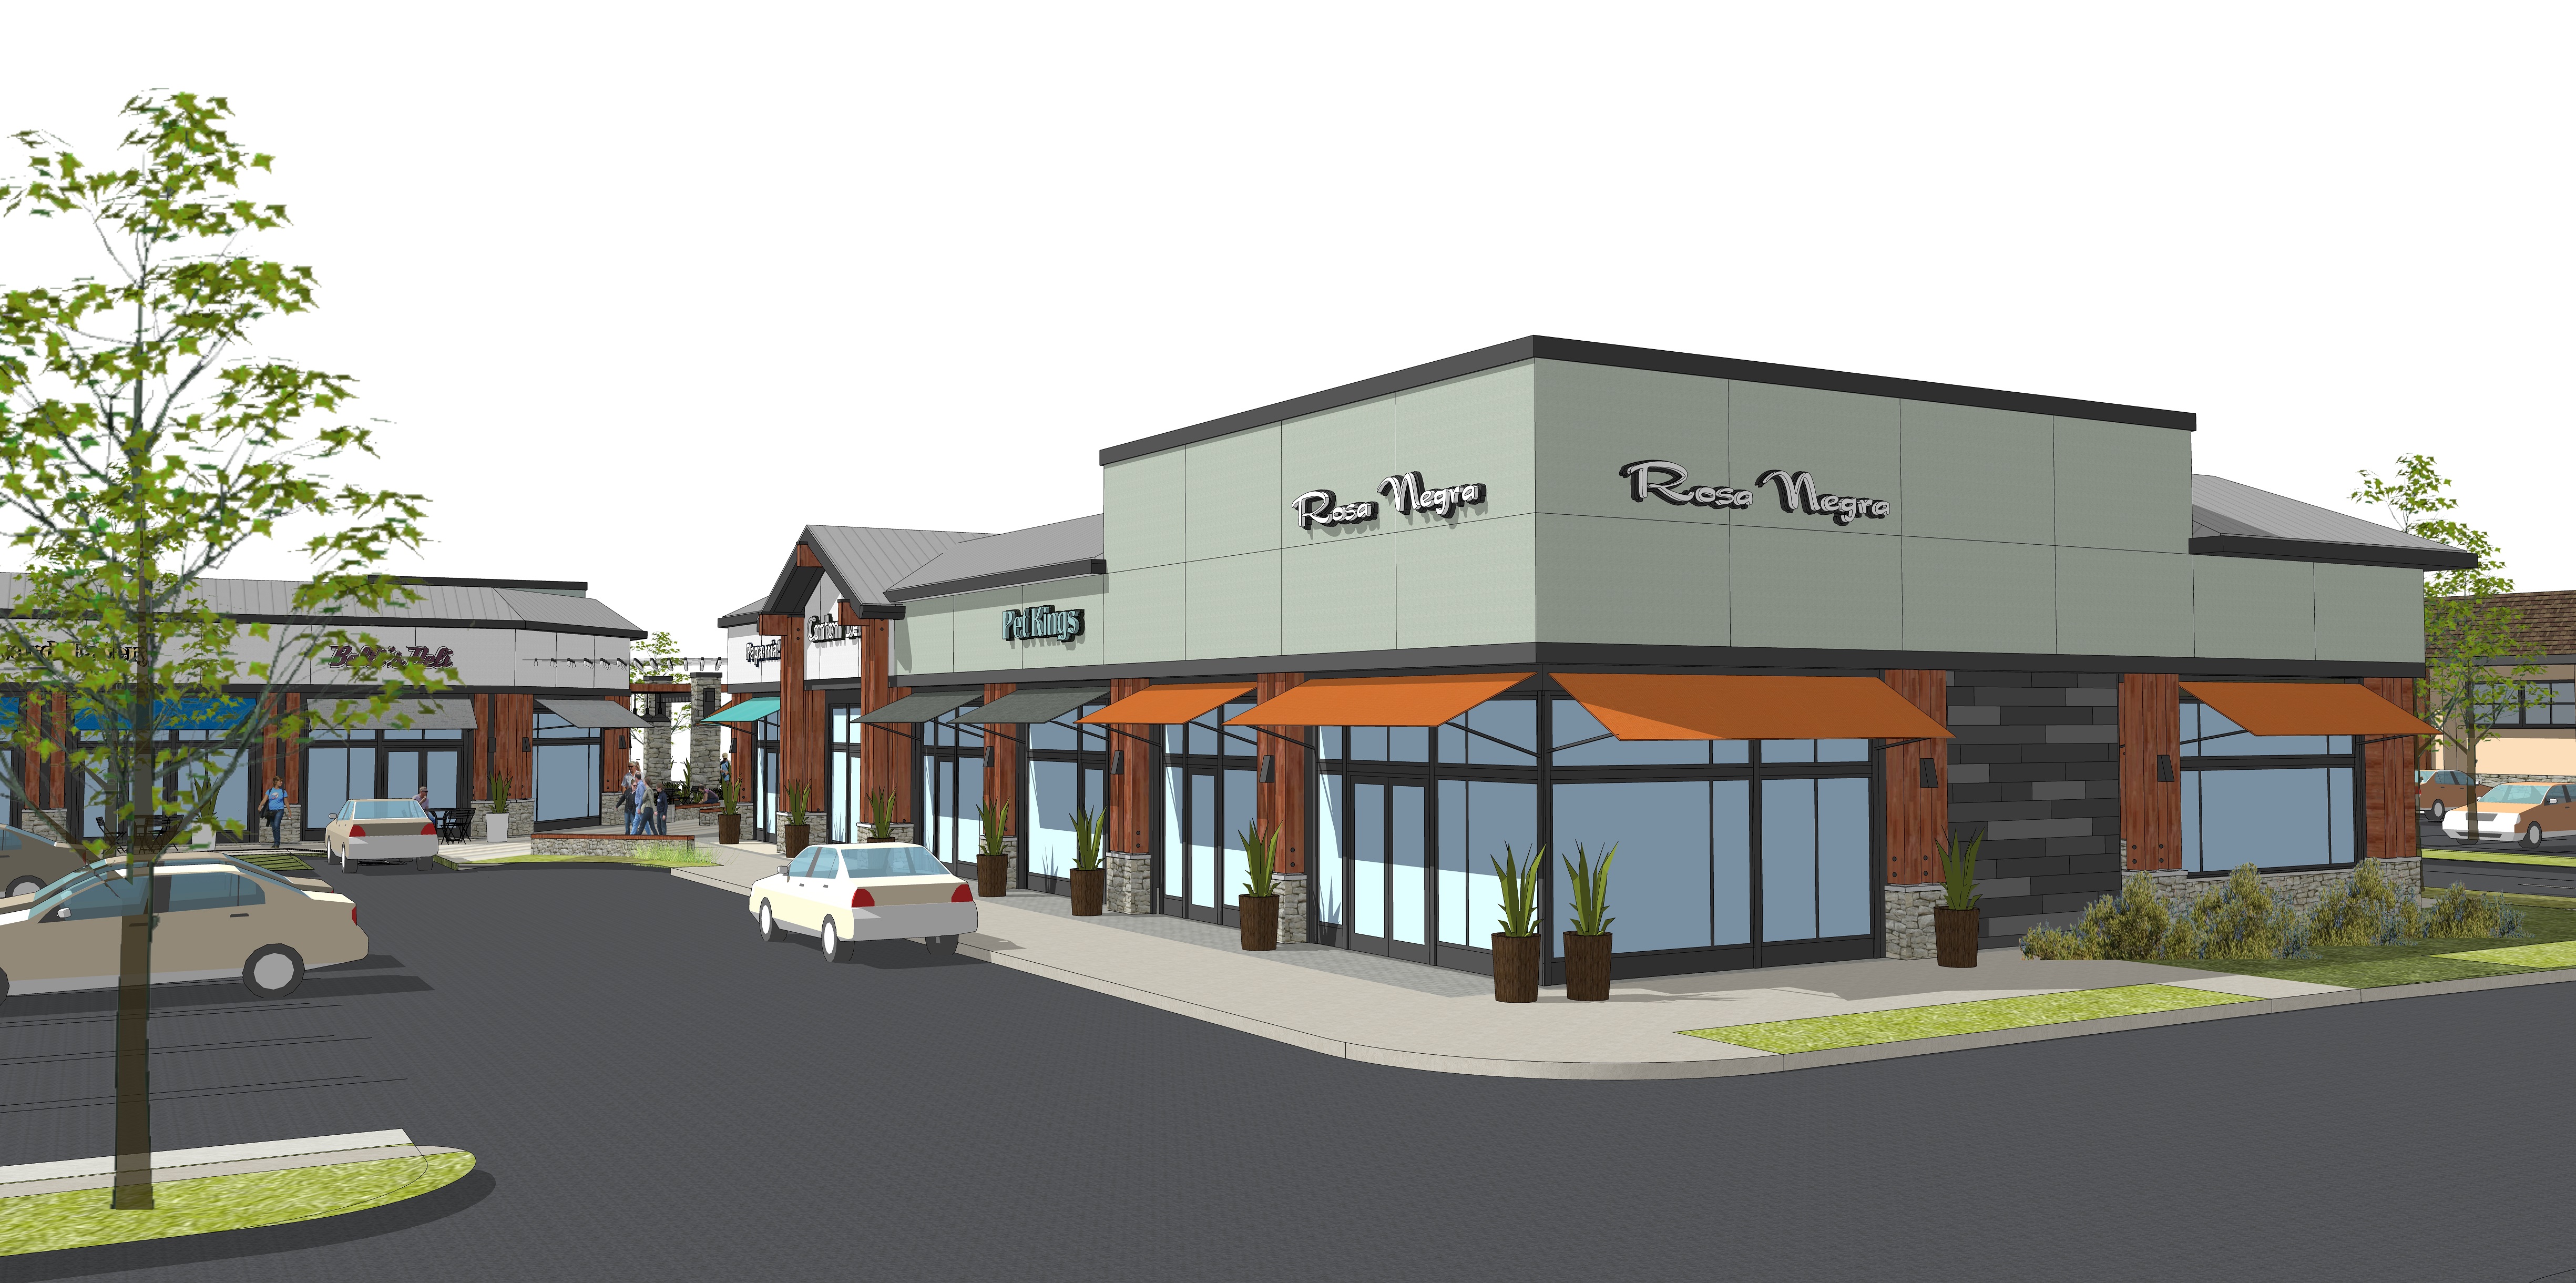 The phased redevelopment of Rossmoor Shopping Center also includes a refreshed façade for Safeway, community-serving retail and services, an upscale salon and new restaurants